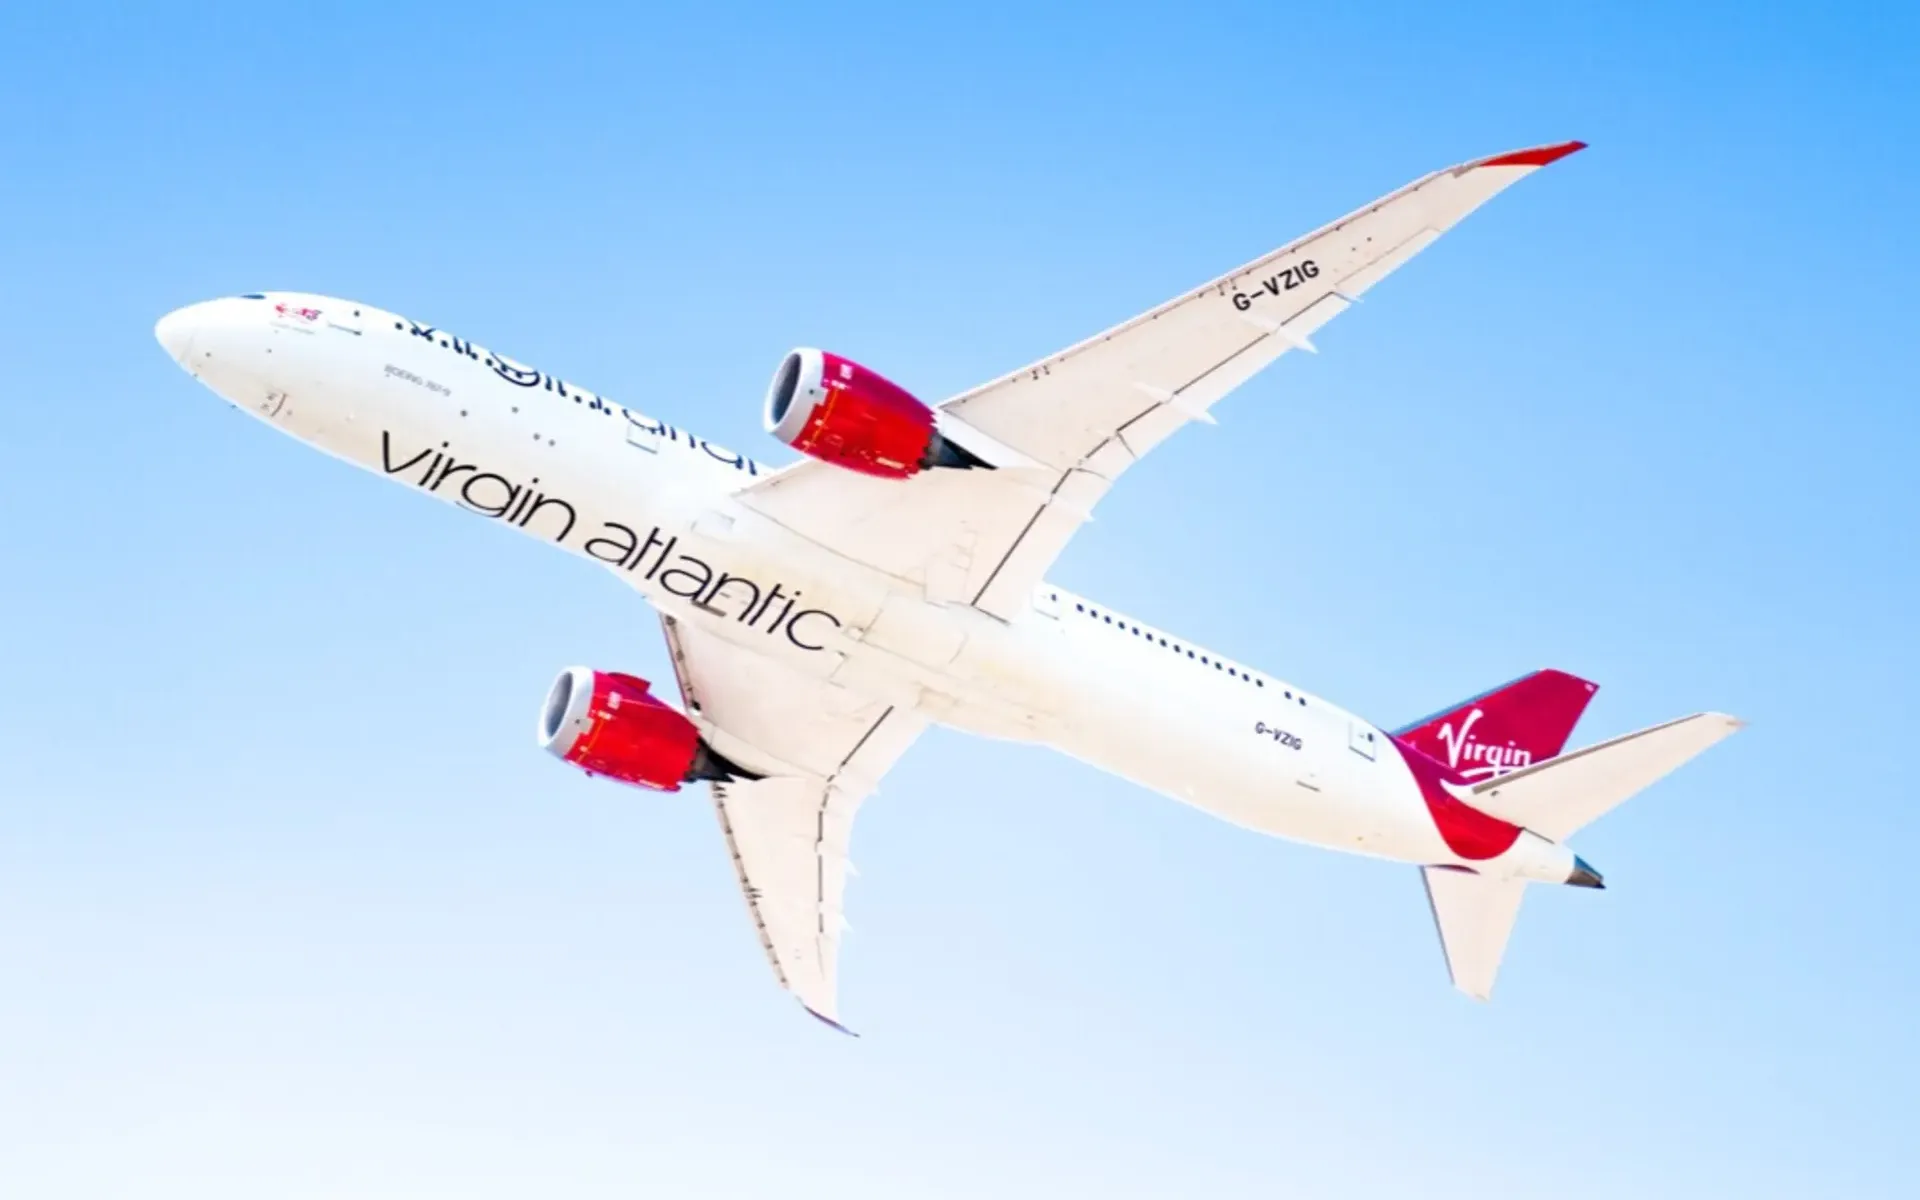 An image of a Virgin Atlantic plane in the air